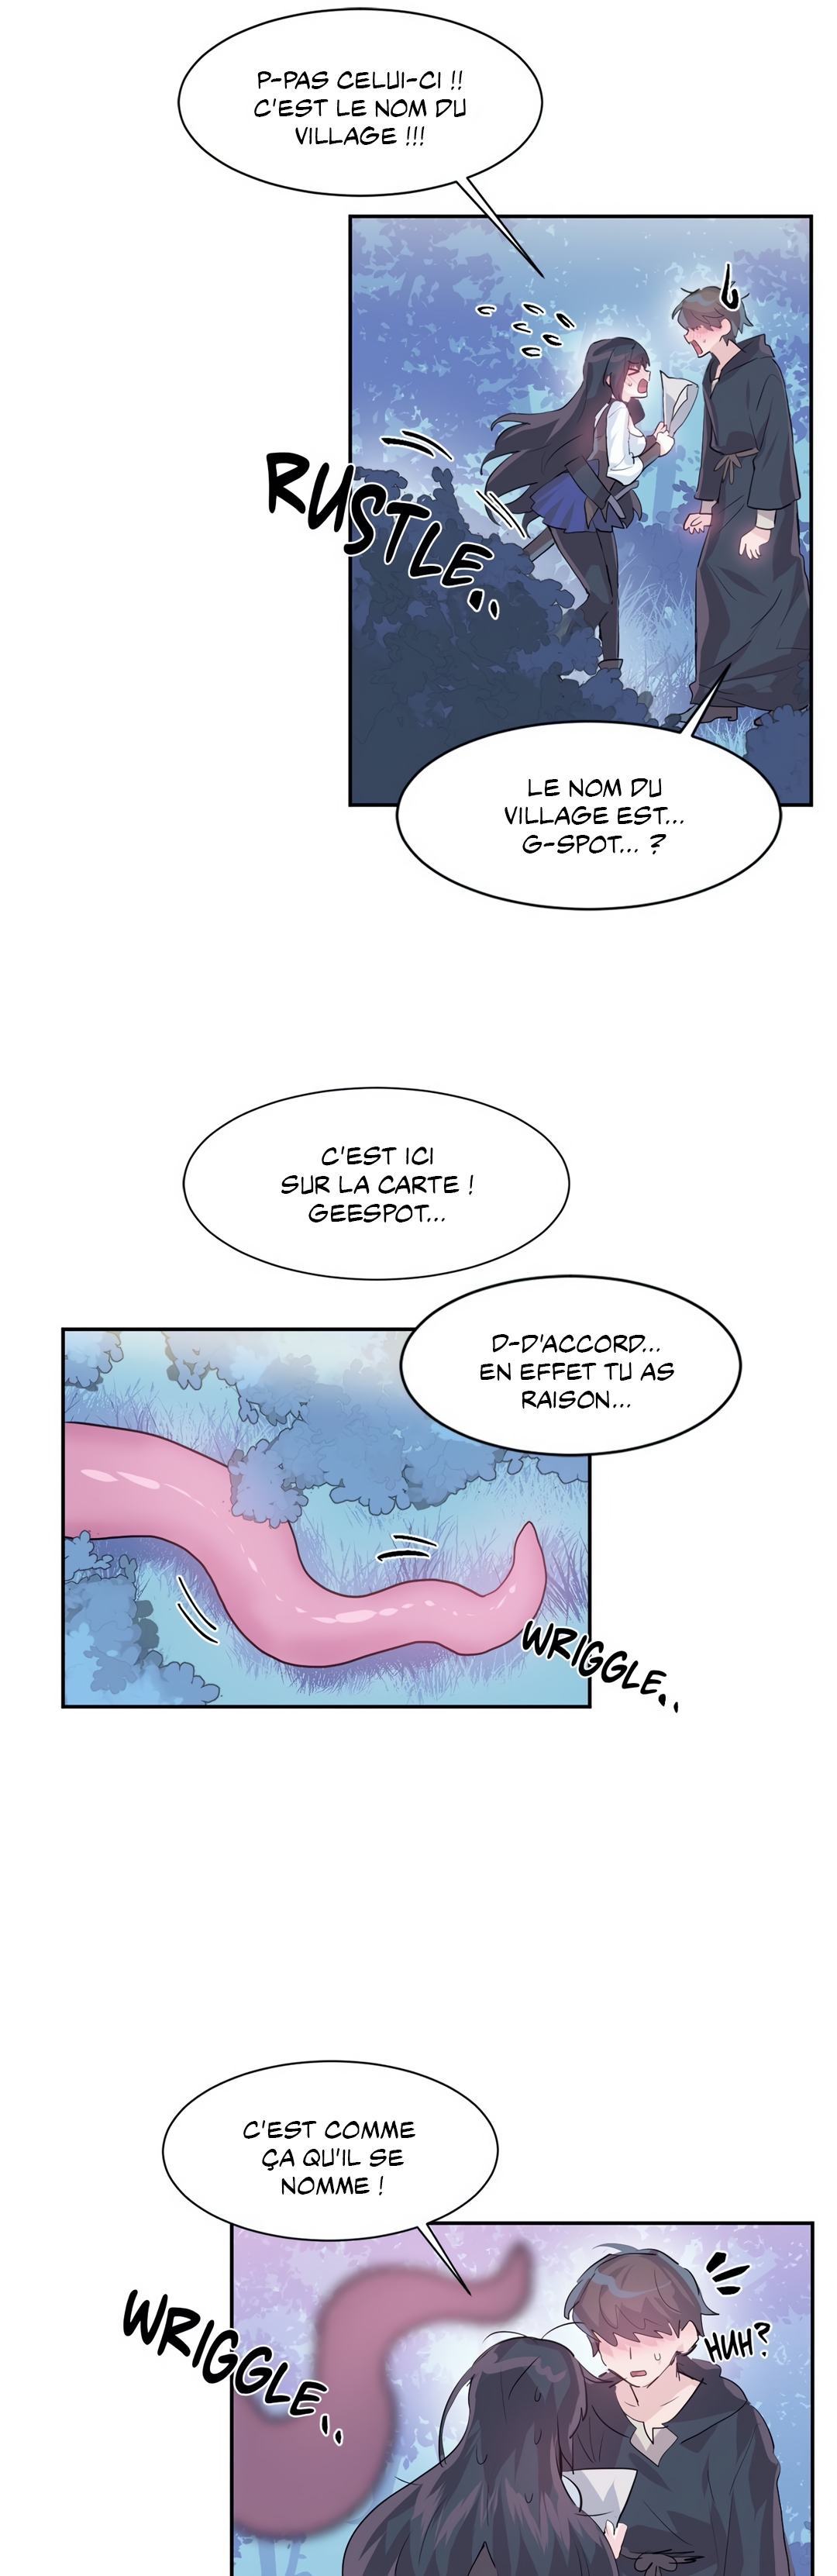 Log in to Lust-a-land VF Chapitre 1 à 5 numero d'image 89